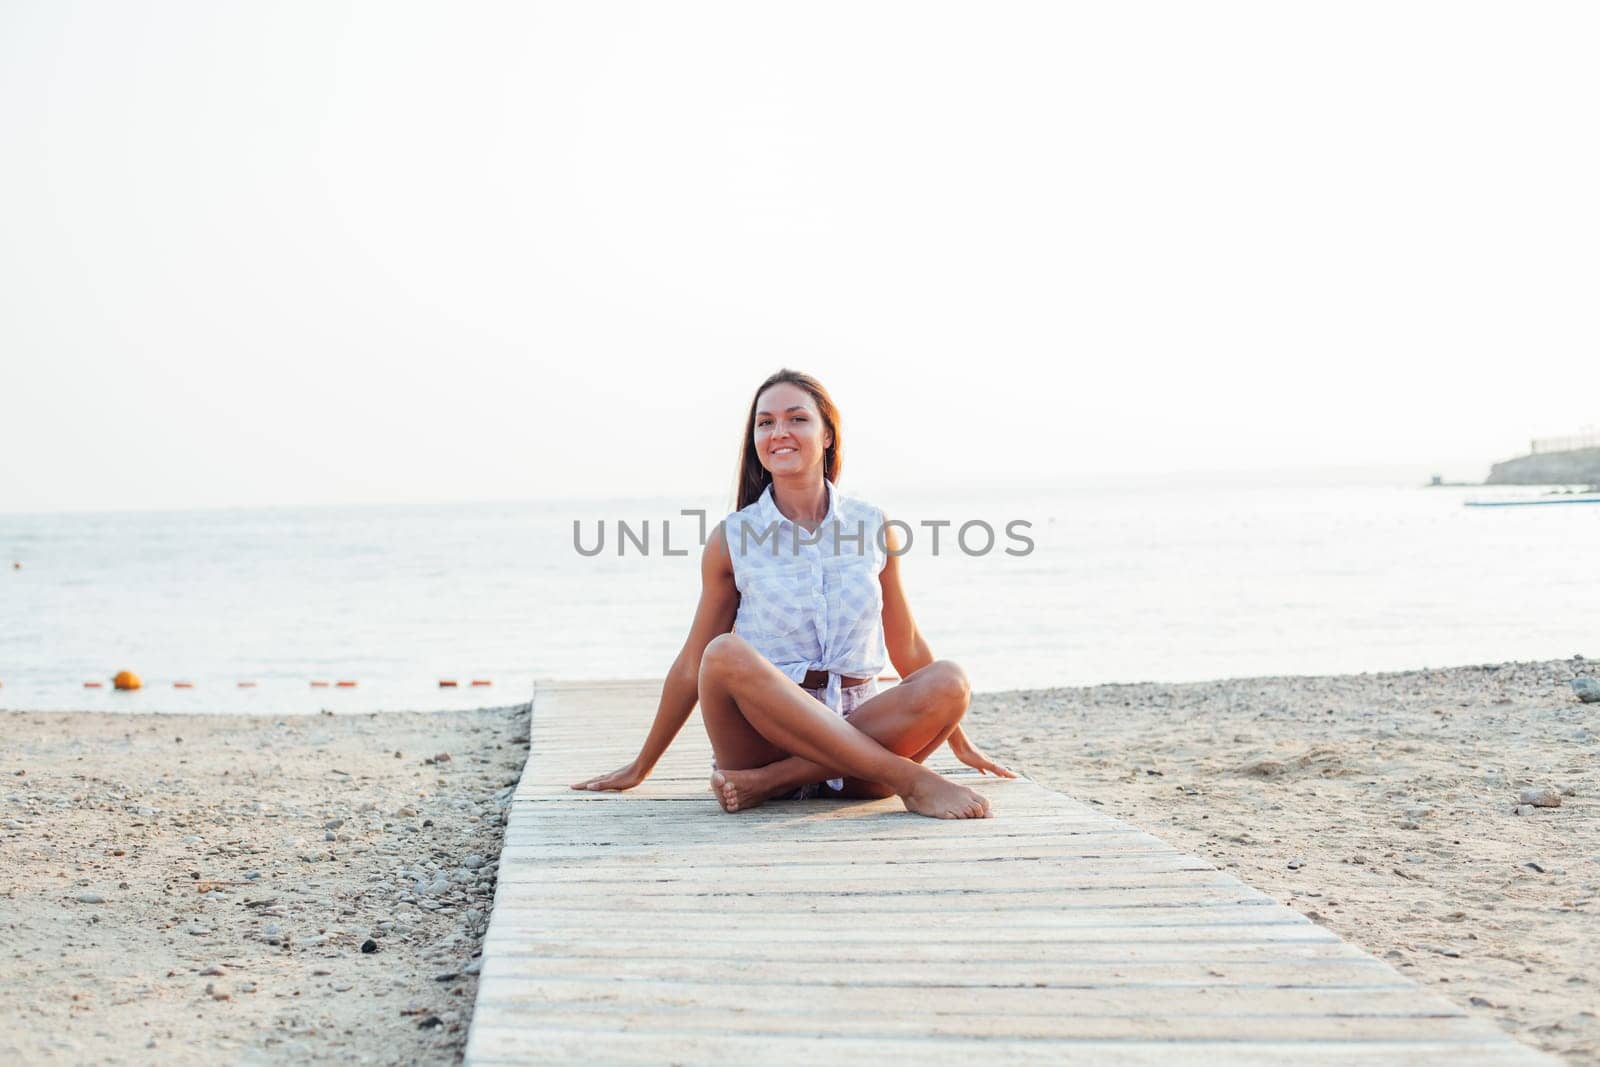 Tanned woman with long hair does yoga on beach by the sea by Simakov